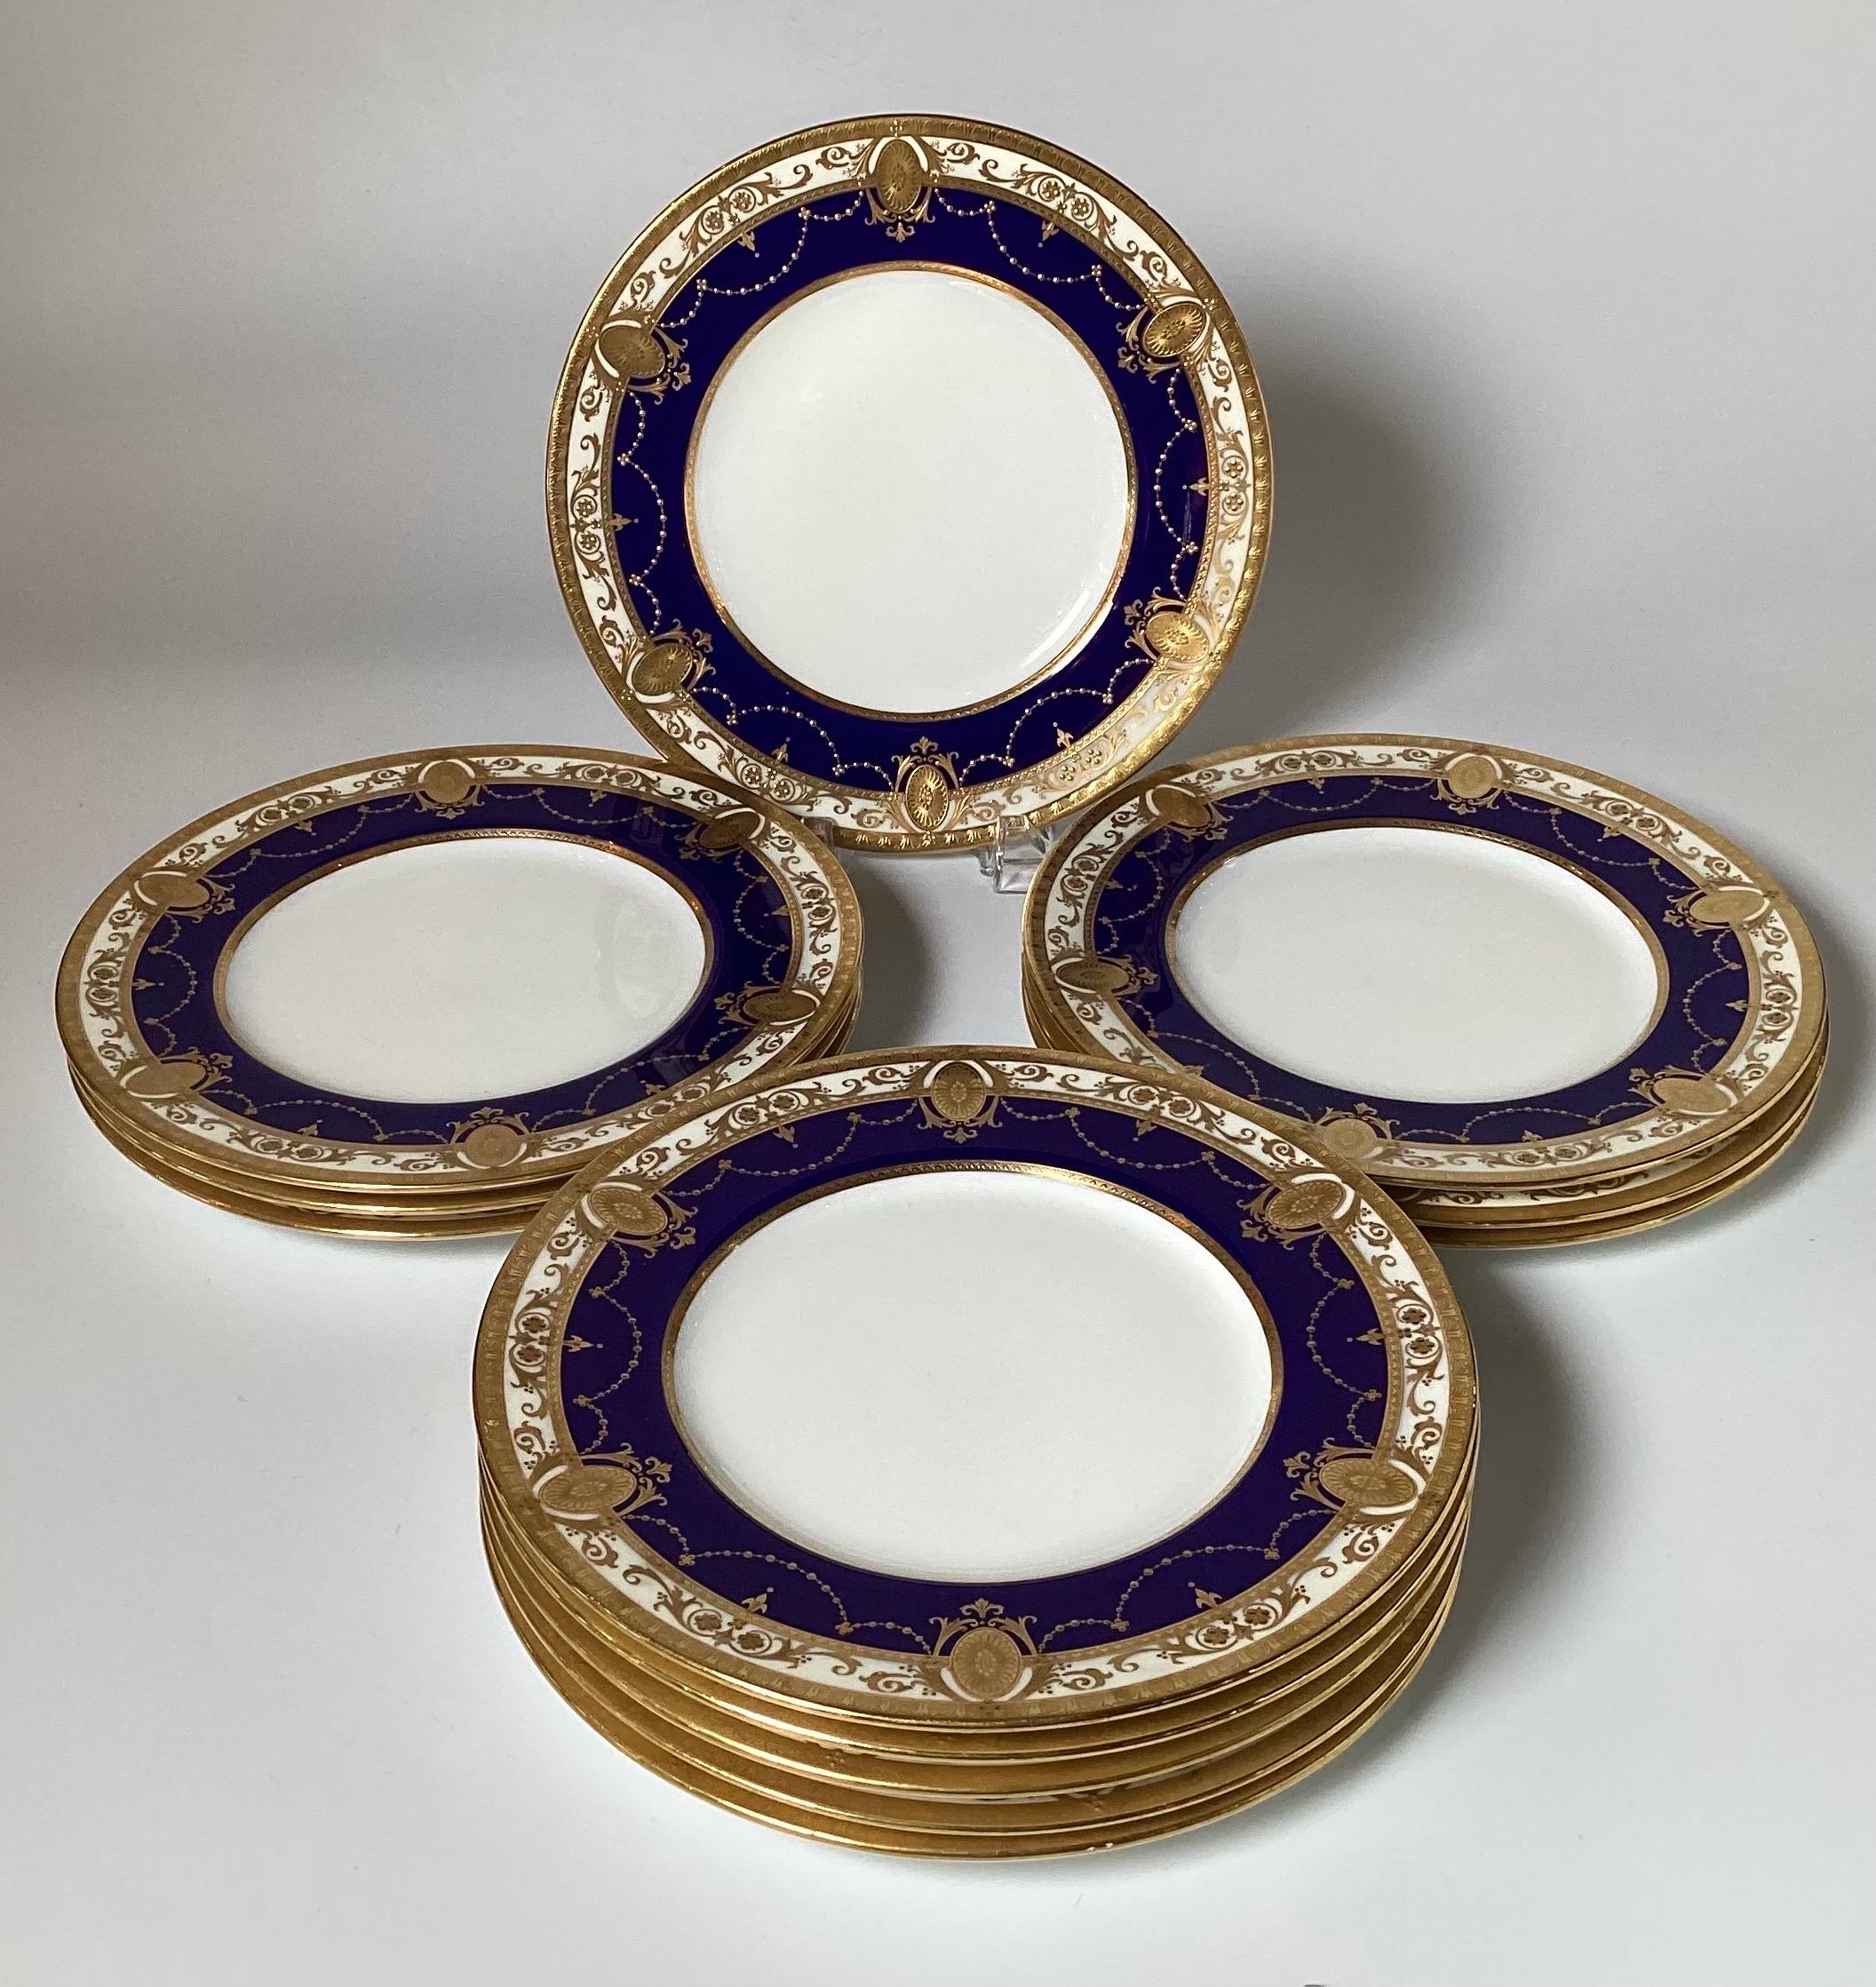 A set of 12 opulent and regal cobalt bordered dinner service plated by Minton England.  The deep blue borders with raised god overlay decoration with medallion and swag pattern.  10.25 inches in Diameter